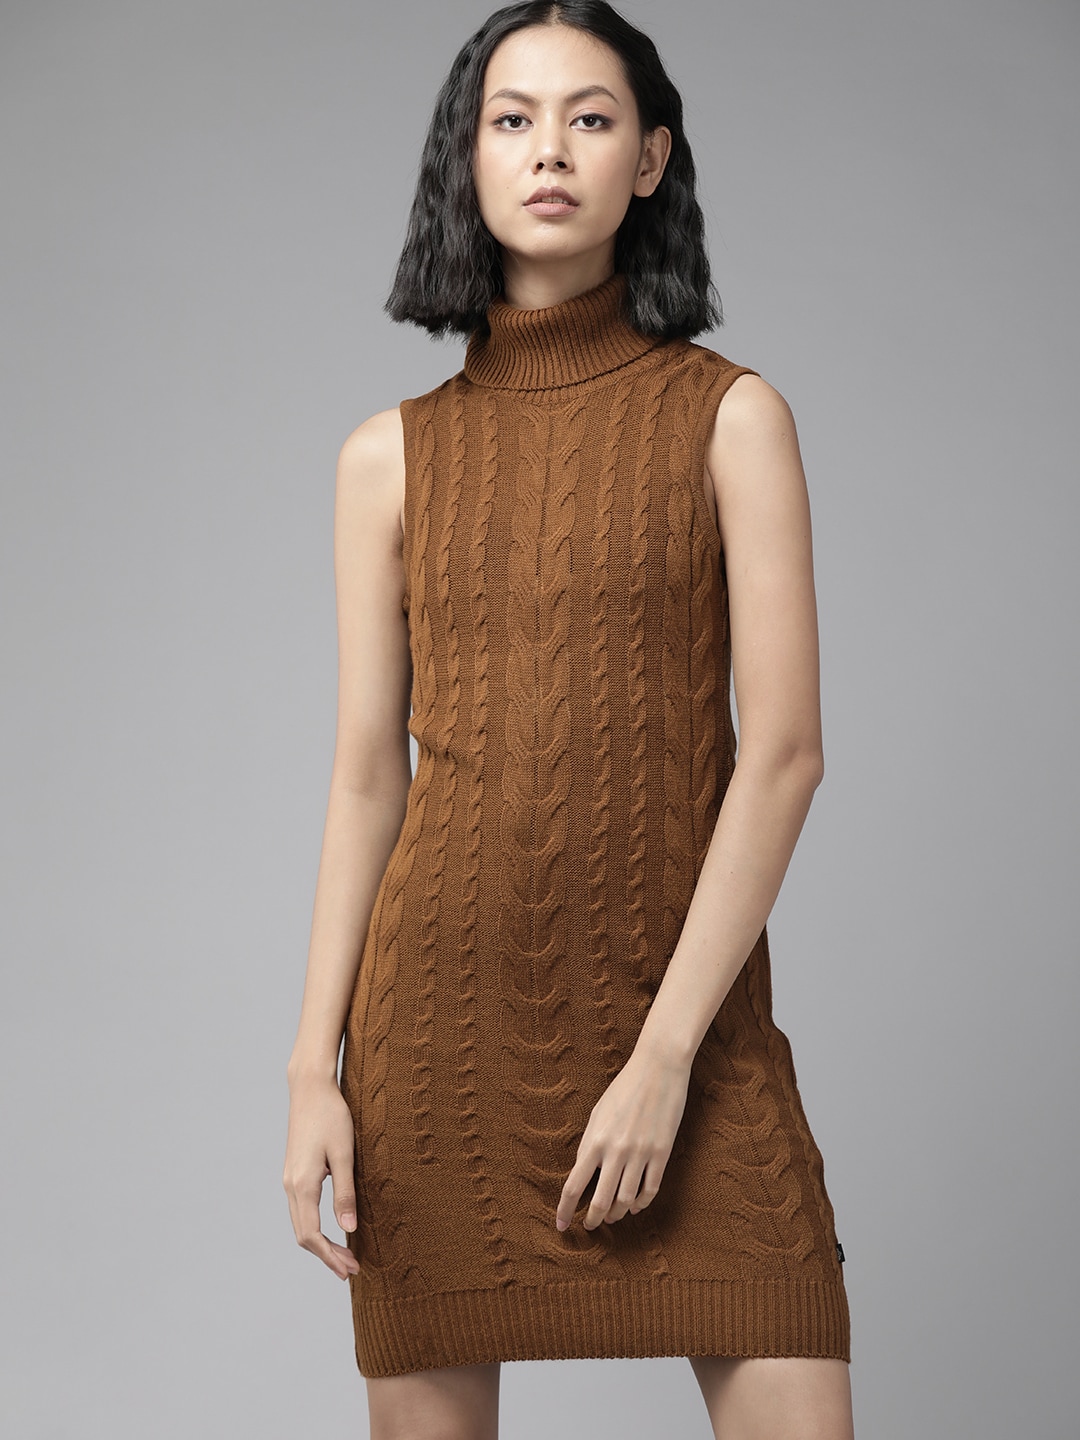 The Roadster Lifestyle Co. Brown Cable Knit Jumper Dress Price in India